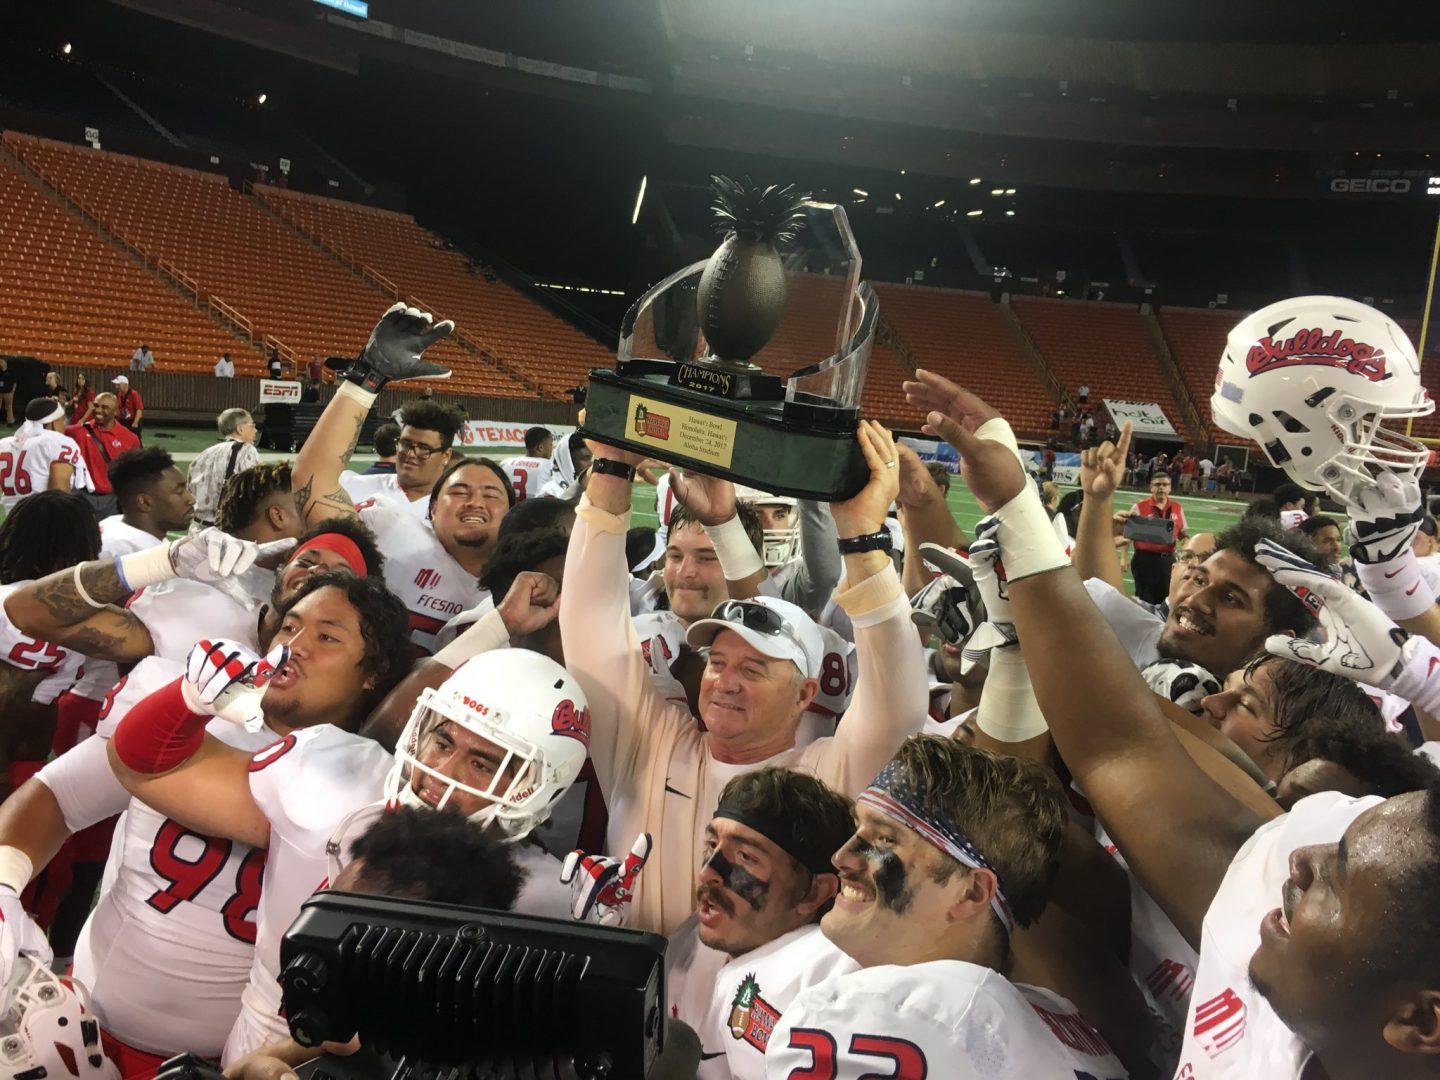 Coach+Jeff+Tedford+and+the+Fresno+State+football+team+celebrating+their+Hawaii+Bowl+win+against+the+Houston+Cougars%2C+33-27+at+Aloha+Stadium+on+Dec.+24.+%28Fresno+State+Athletics%29+